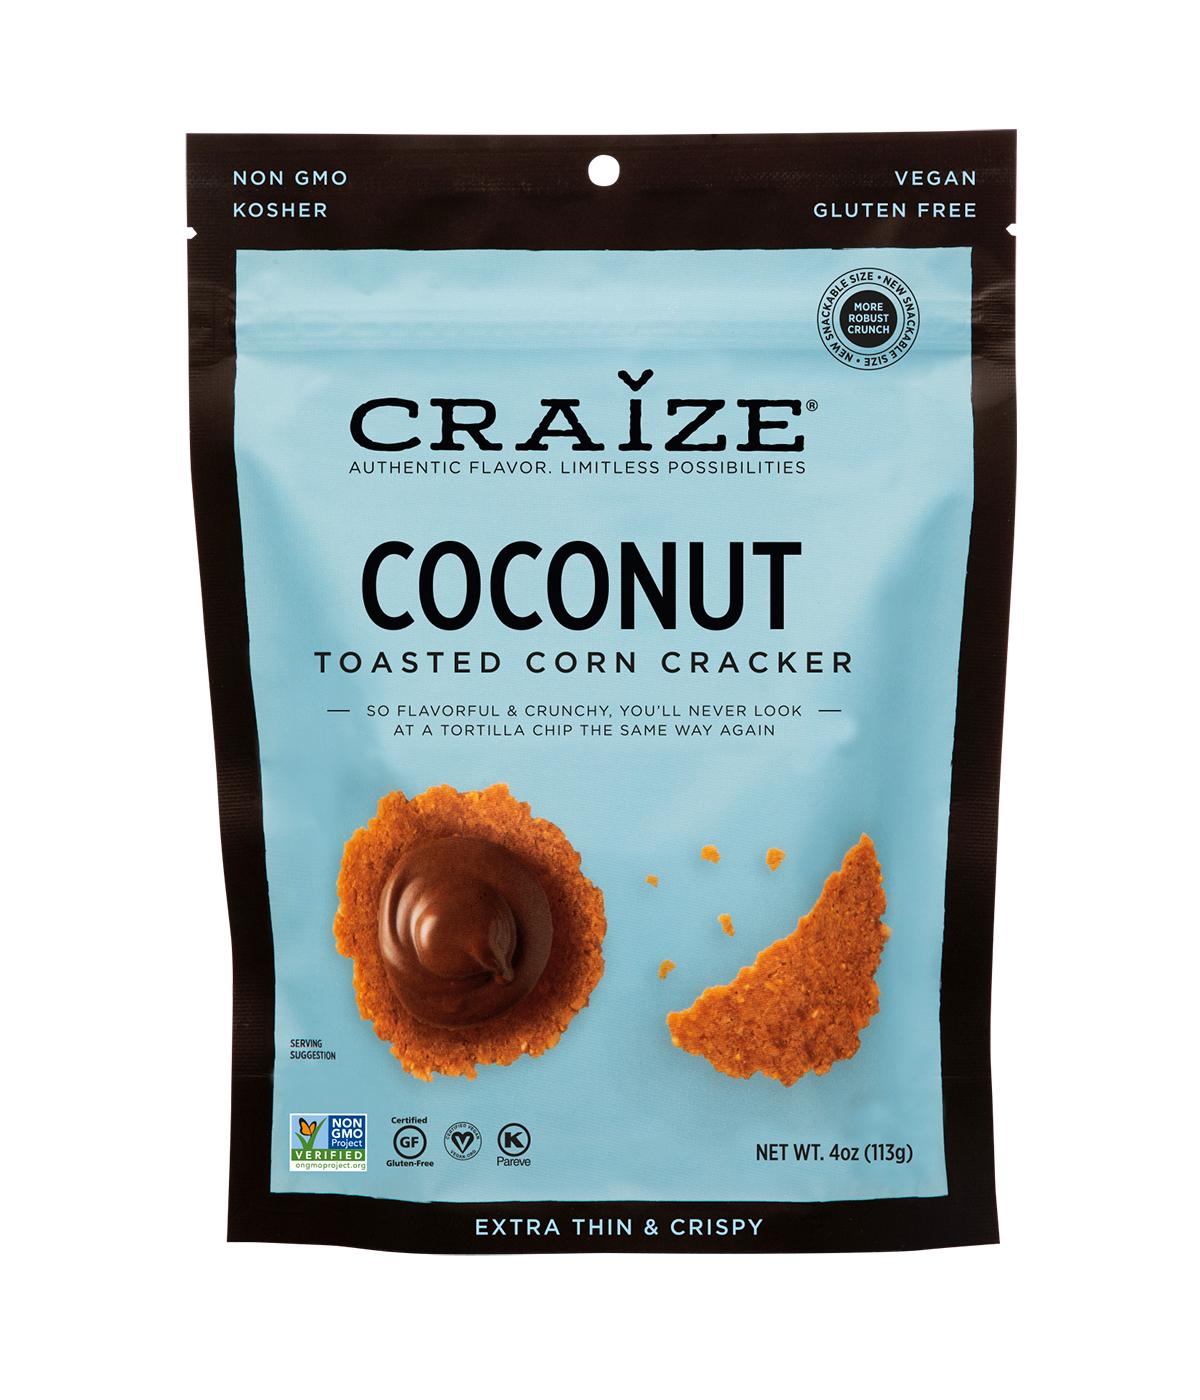 Craize Coconut Toasted Corn Crackers; image 1 of 2